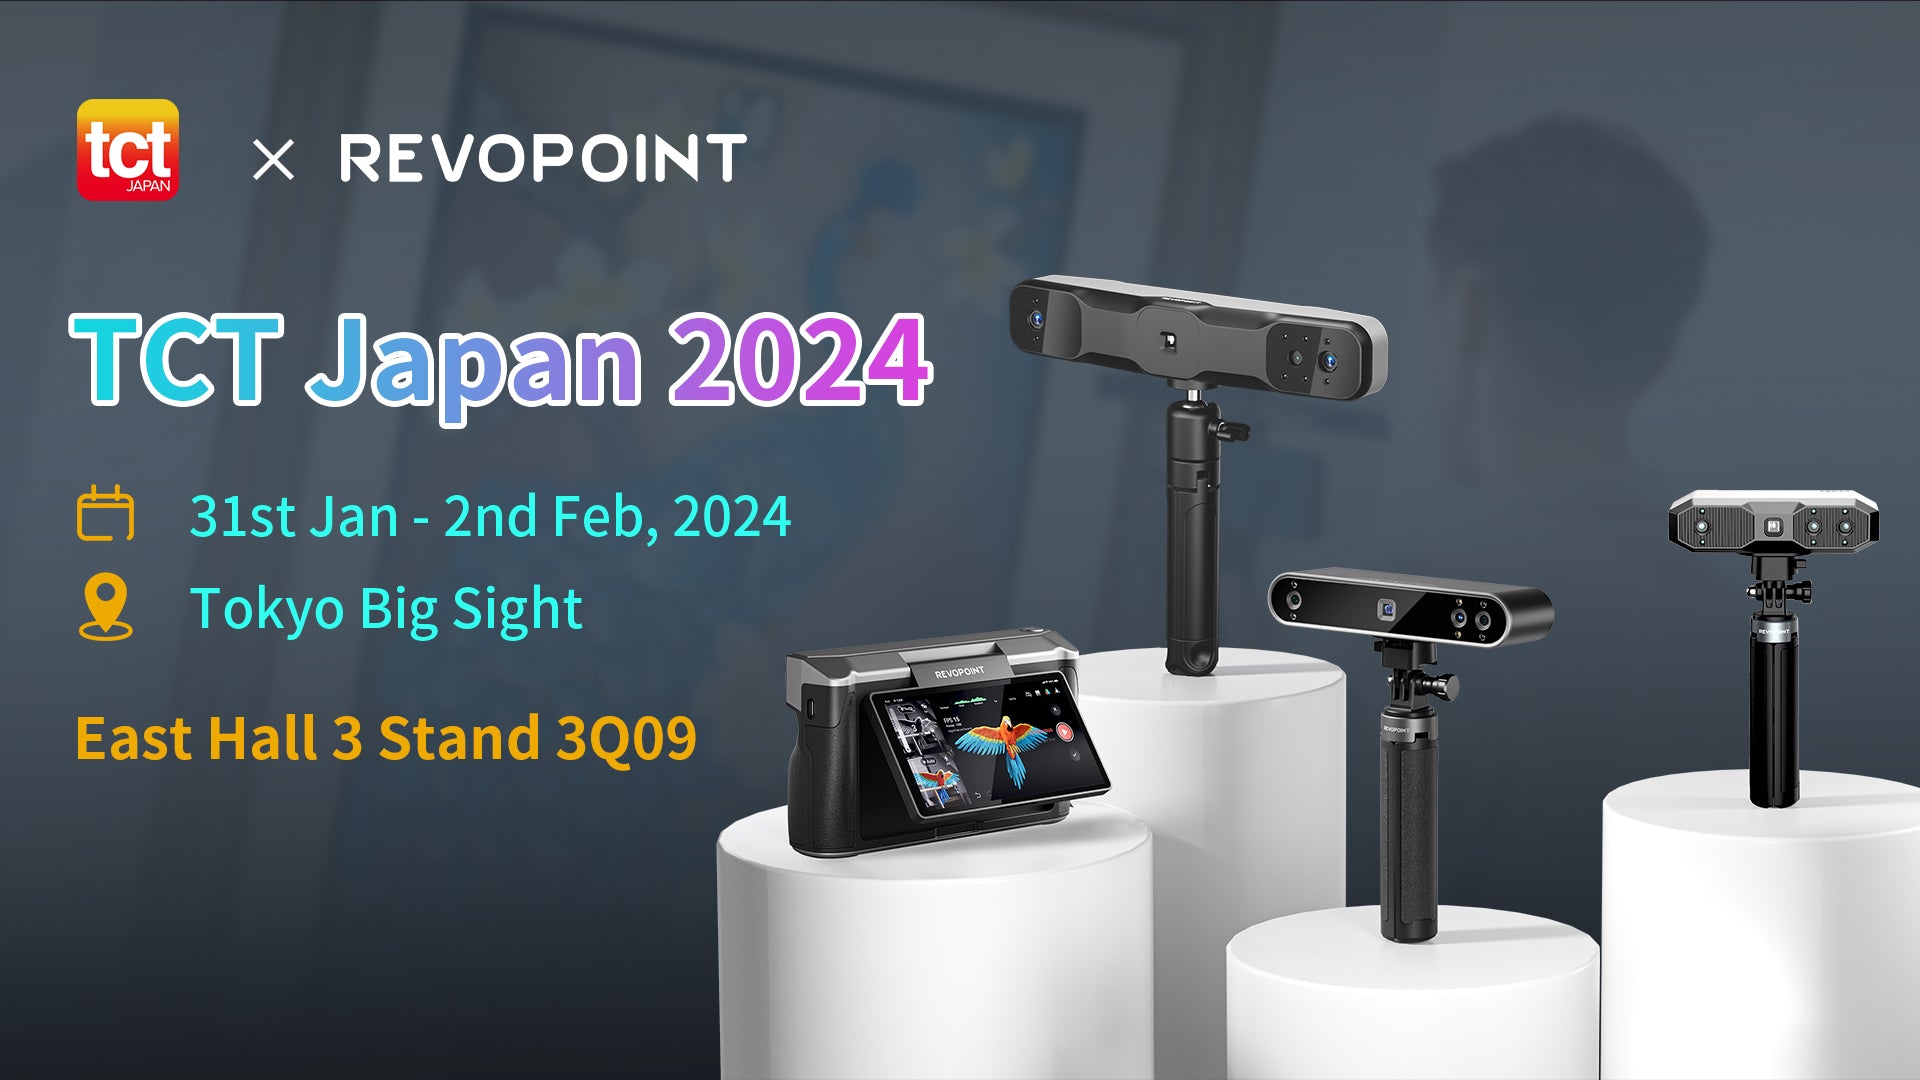 Discover Revopoint's Latest 3D Scanners at TCT Japan 2024